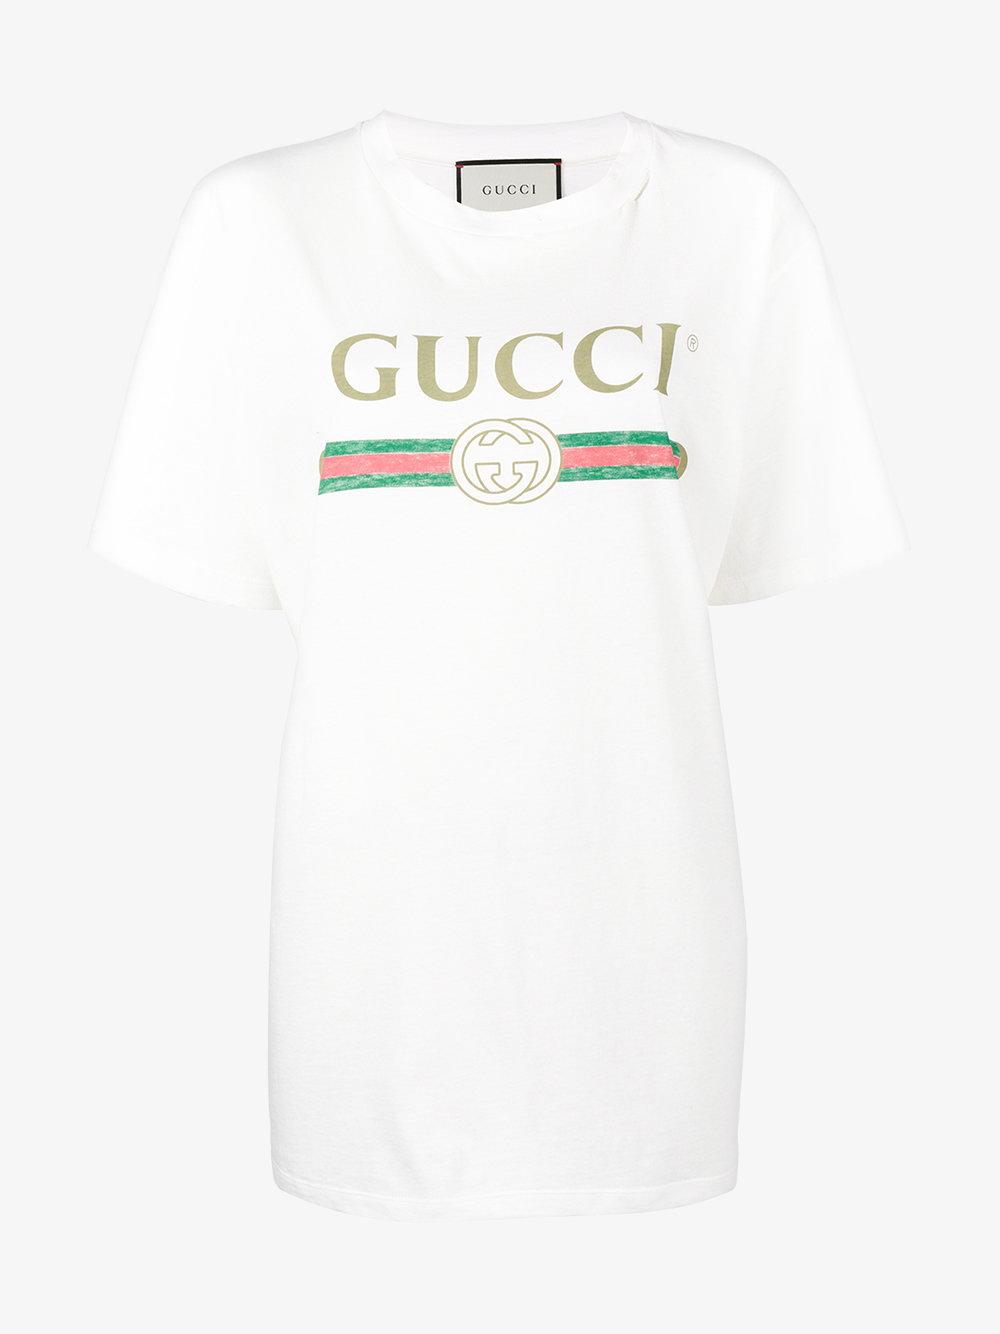 Lyst - Gucci Print Printed T-shirt in White